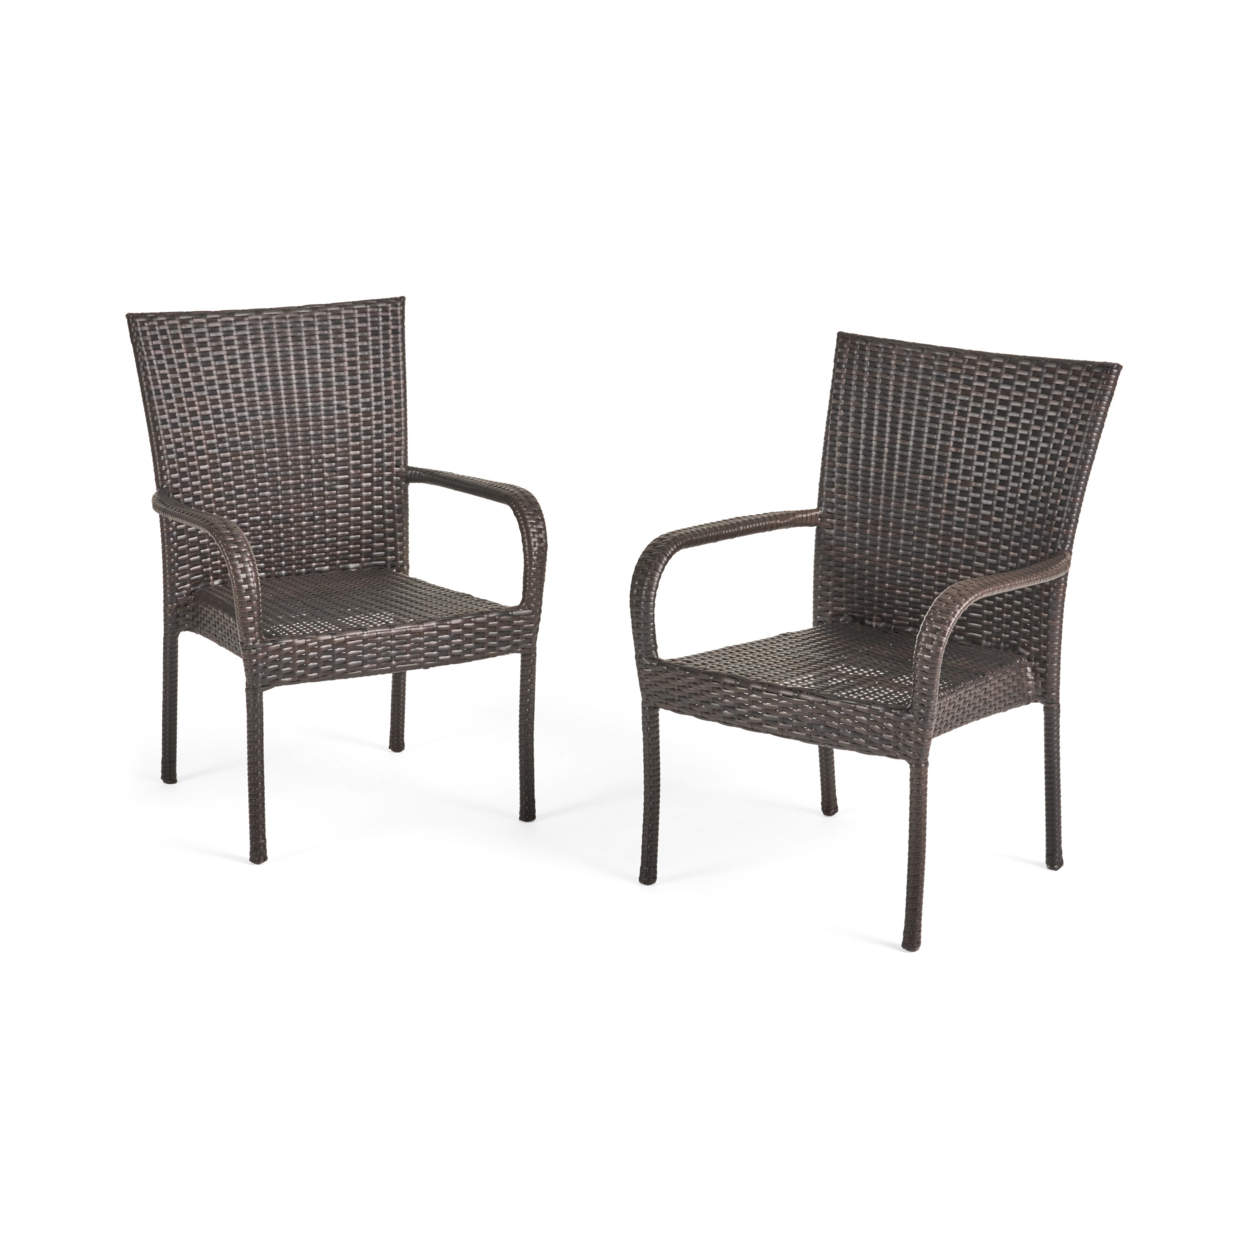 Ferndale Outdoor Contemporary Wicker Stacking Chairs (Set Of 2)